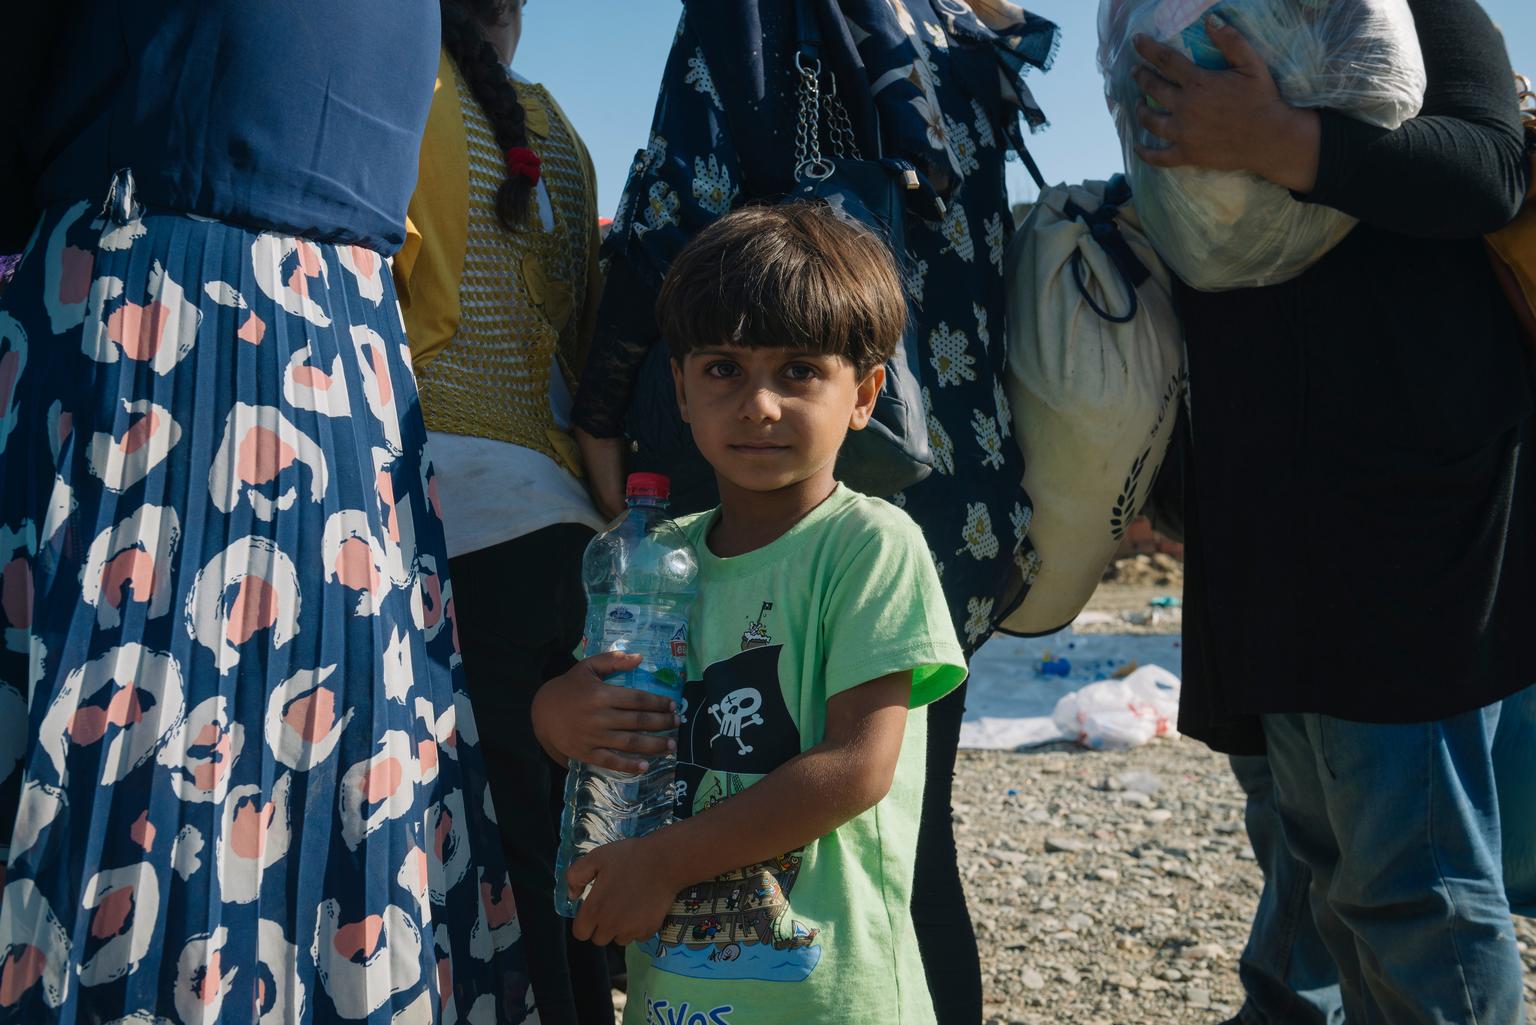 A child from Syria waits for a temporary transit visa in Gevgelija, Macedonia, after crossing the border from Greece. UNICEF is providing migrants like him with clean water